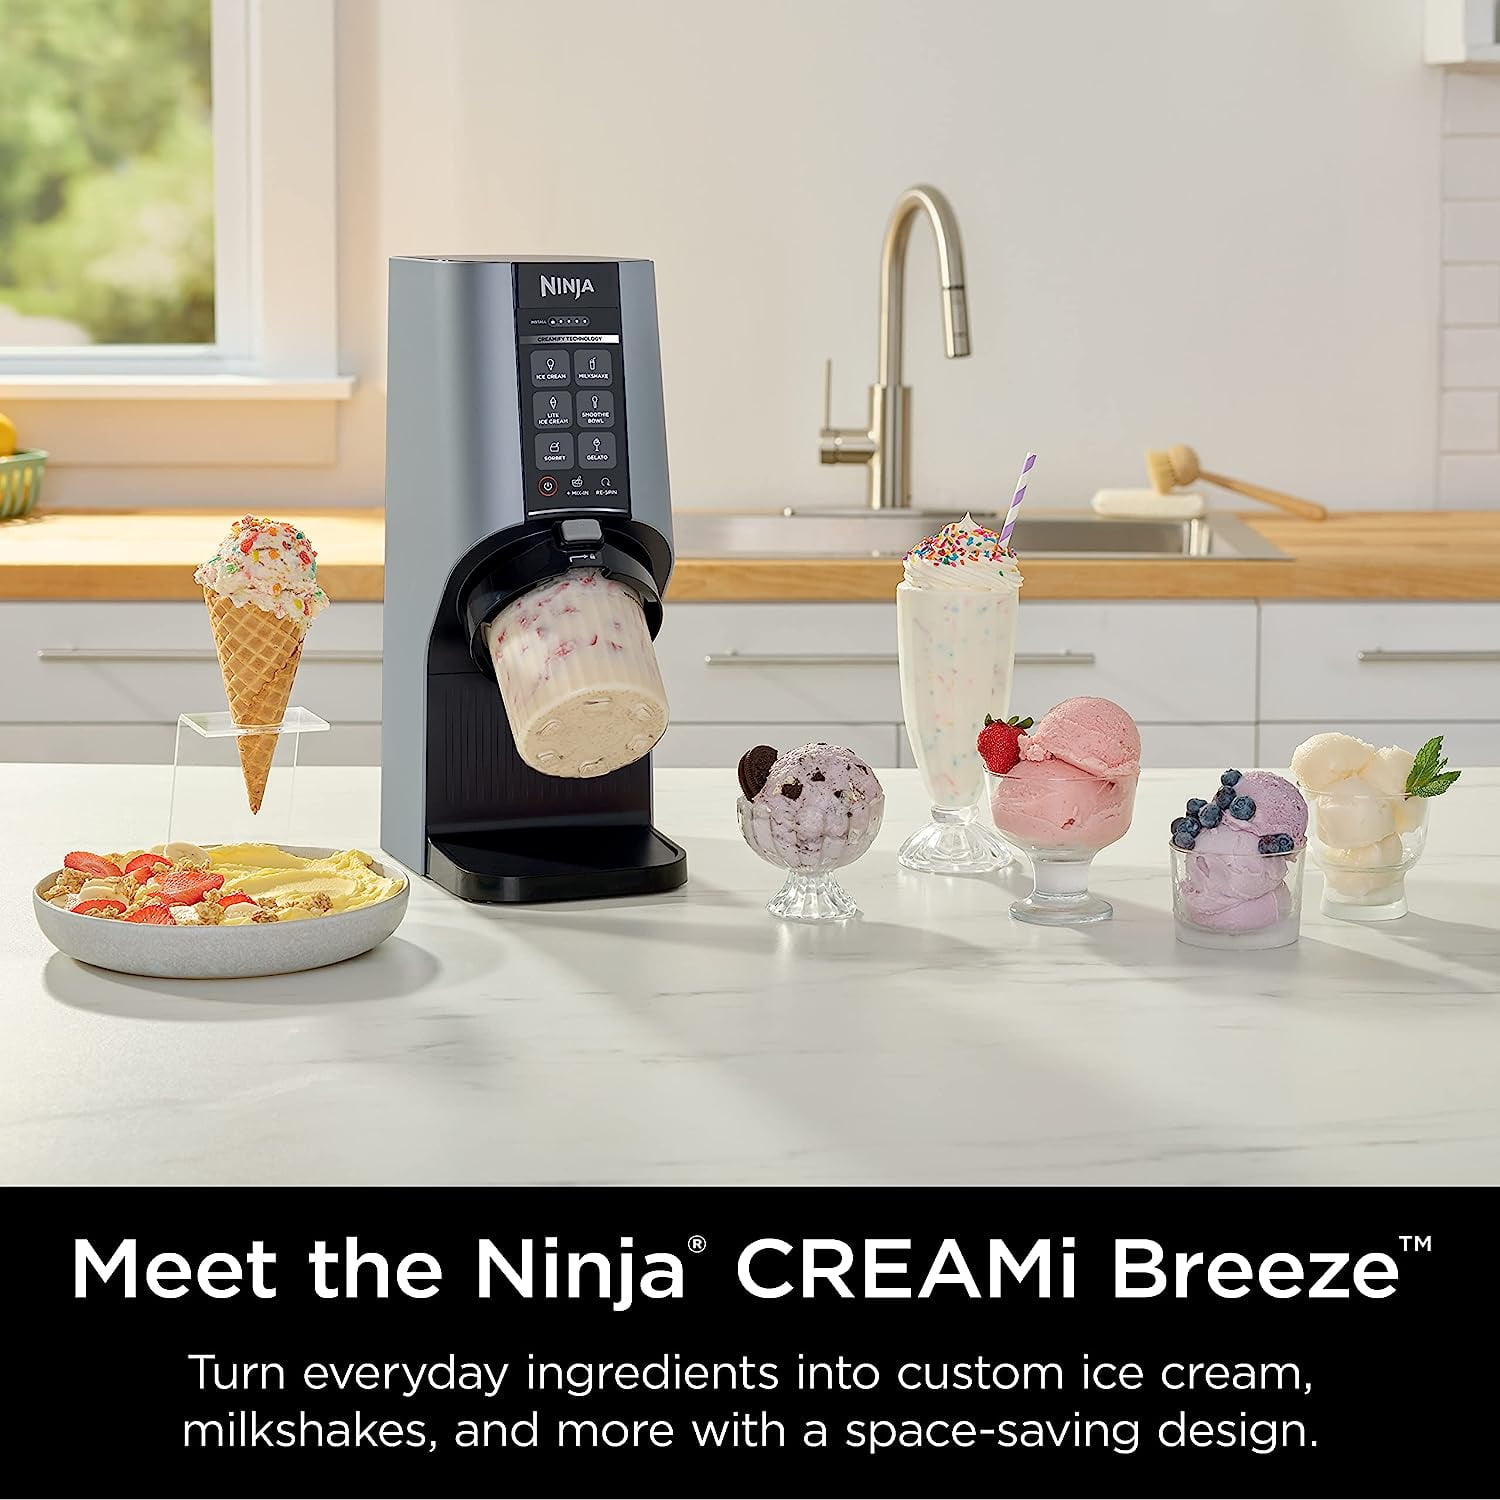  Ninja NC100 CREAMi Breeze 5-in-1 Ice Cream & Frozen Treat  Maker, for Ice Cream, Gelato, Sorbet, Milkshakes, Smoothie Bowls & More, 5  One-Touch Programs, (2) Pint Containers & Lids, Perfect for